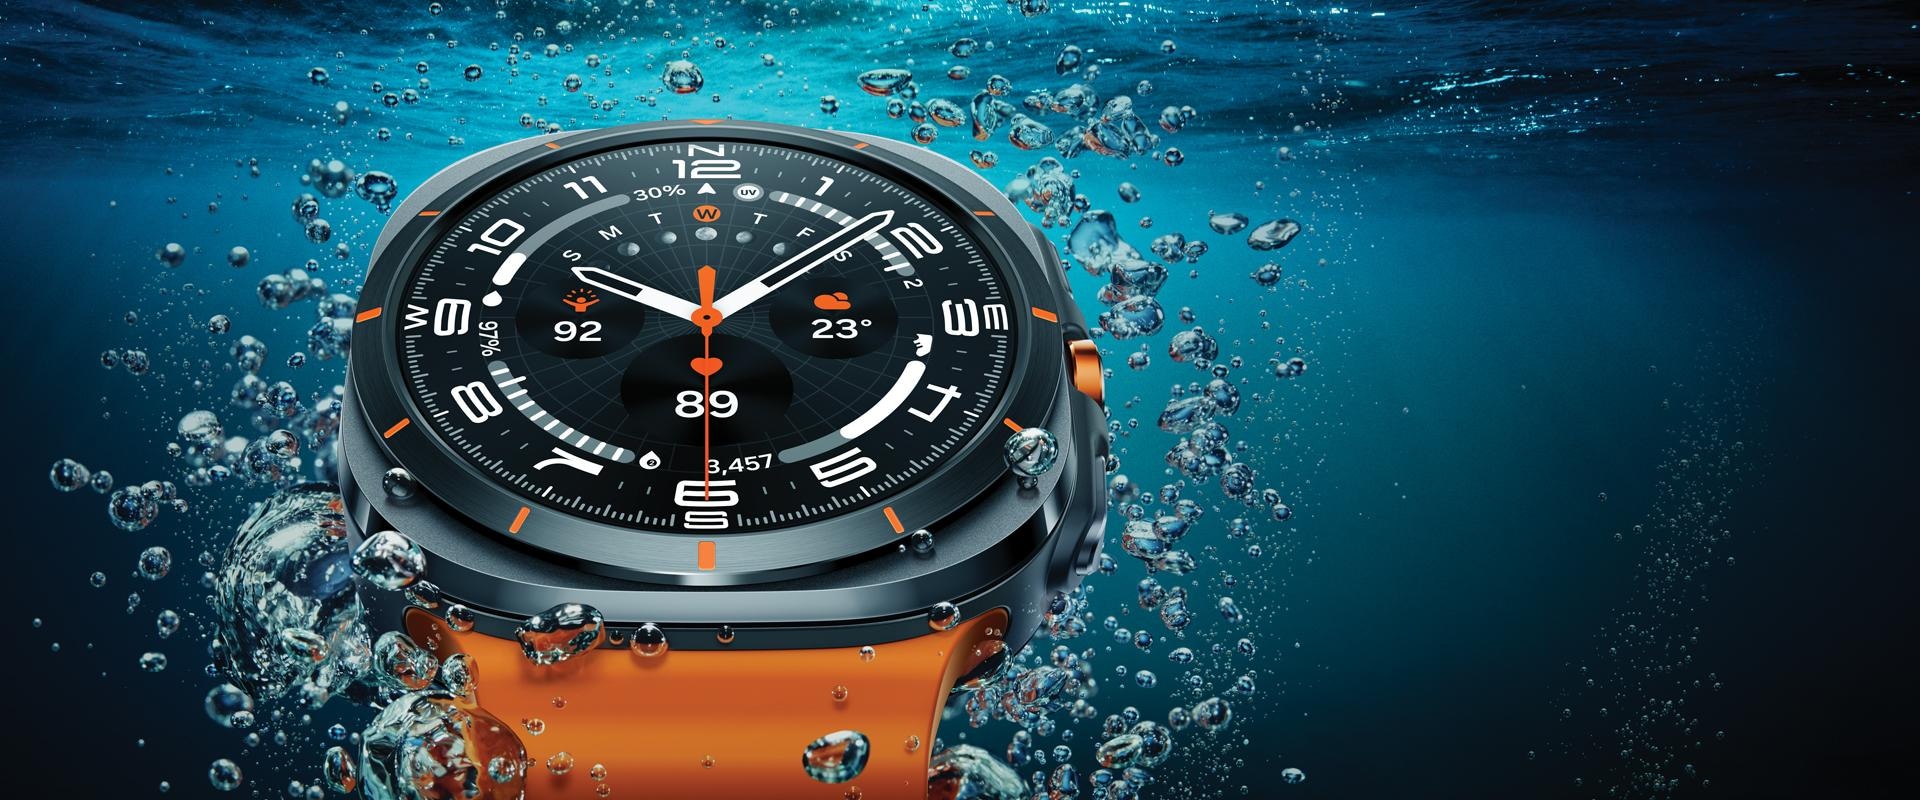 A Samsung Galaxy Watch Ultra is seen close-up in the water near the surface, showcasing its design.